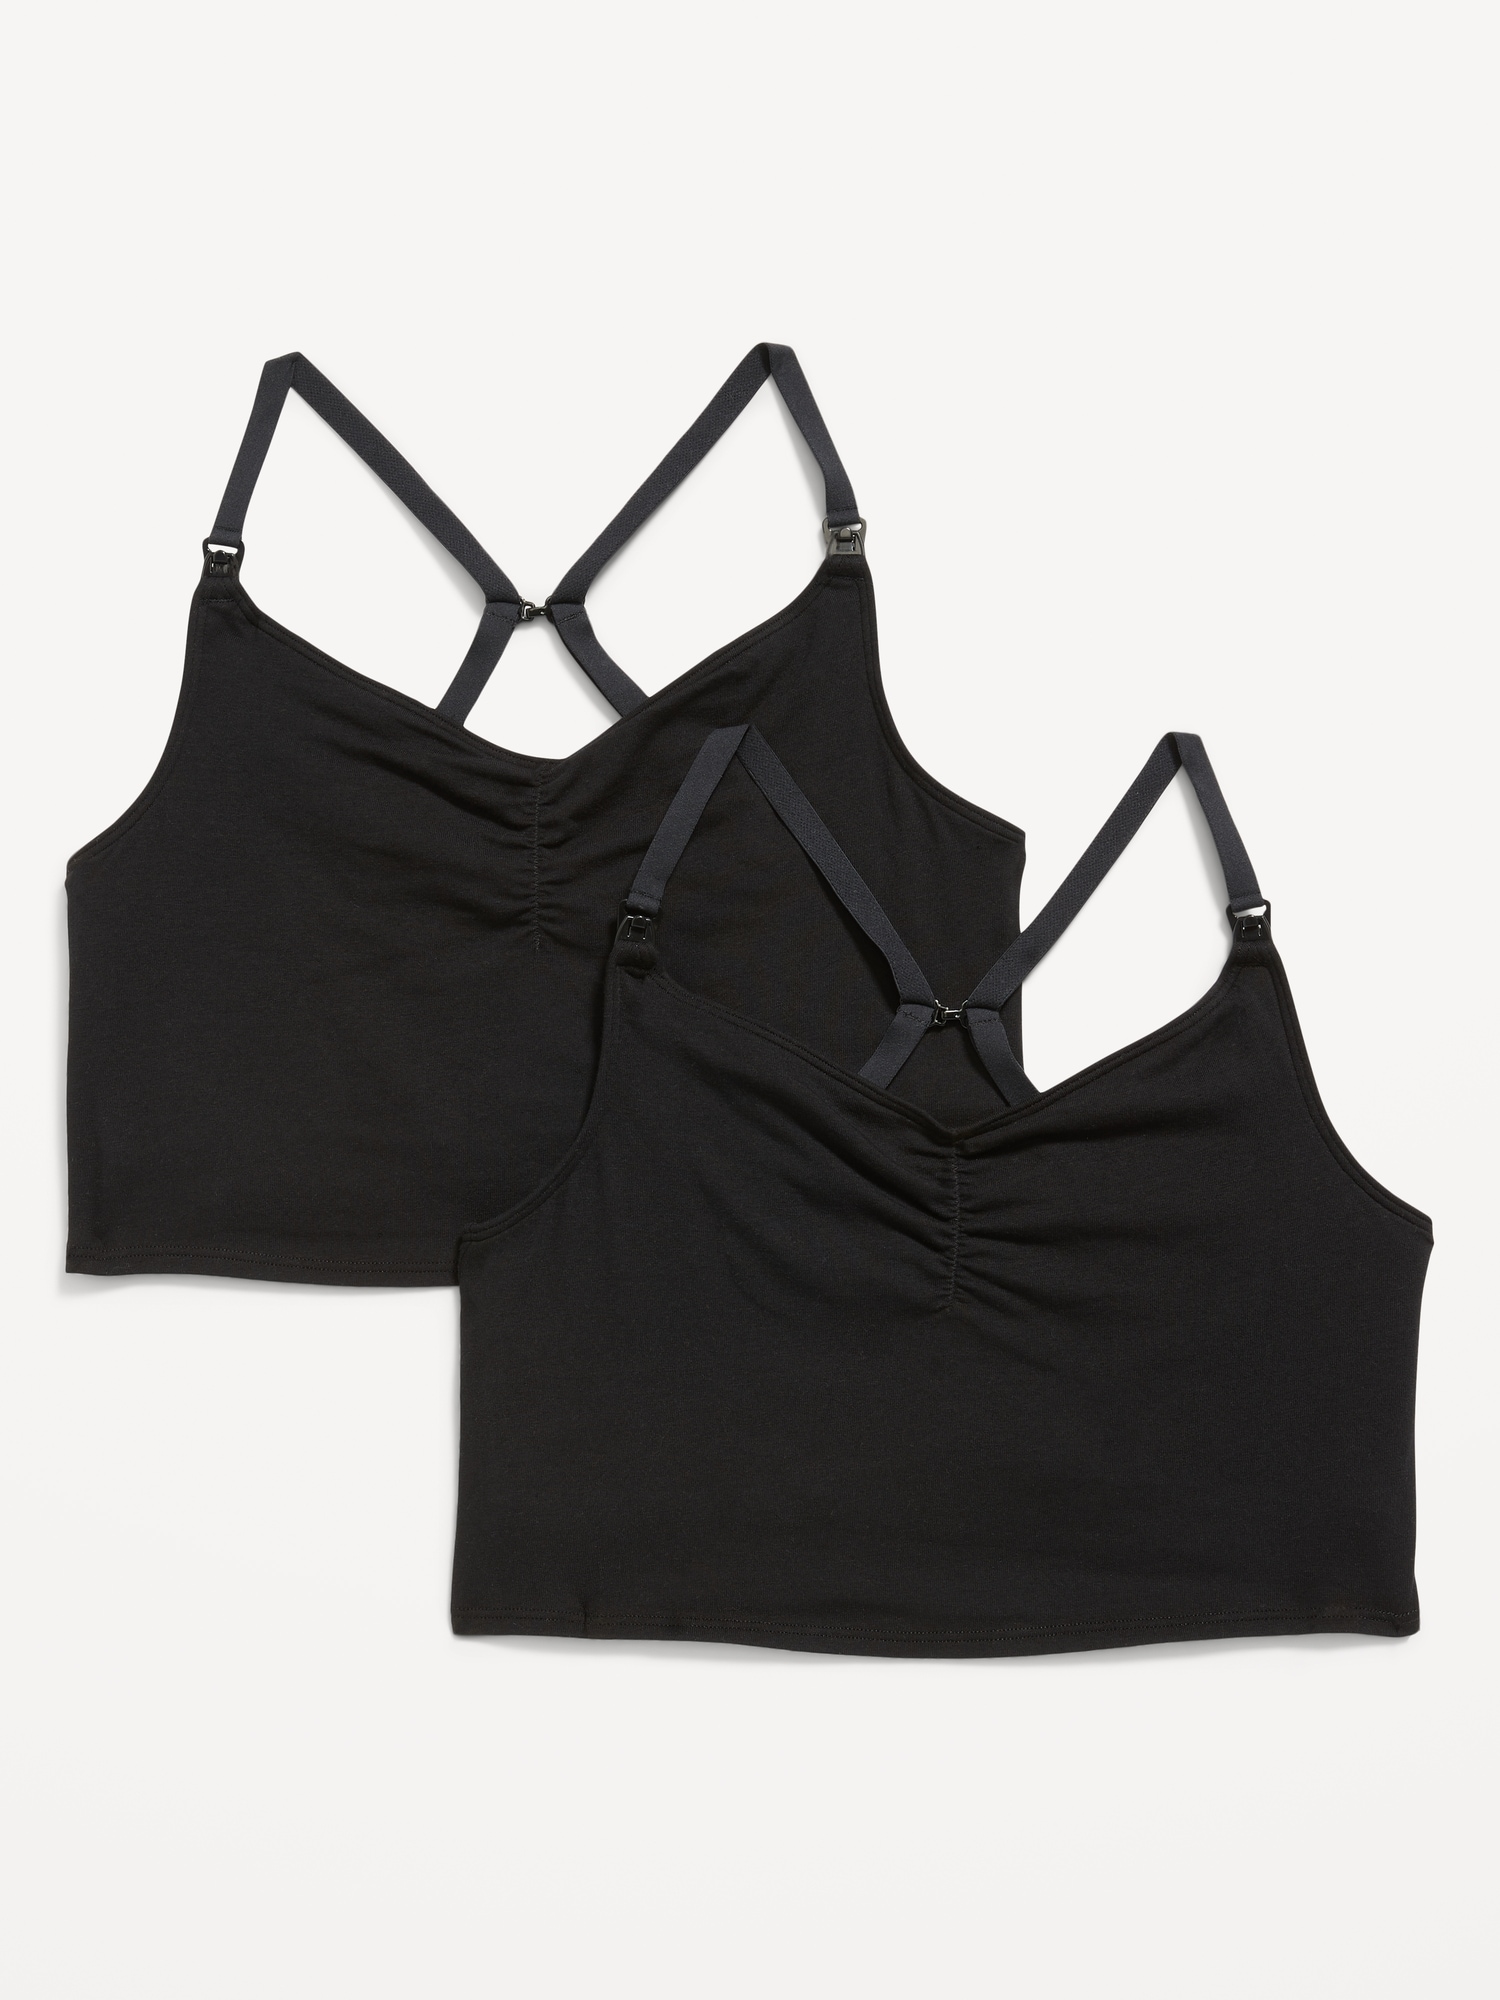 Postpartum Recovery Clothes